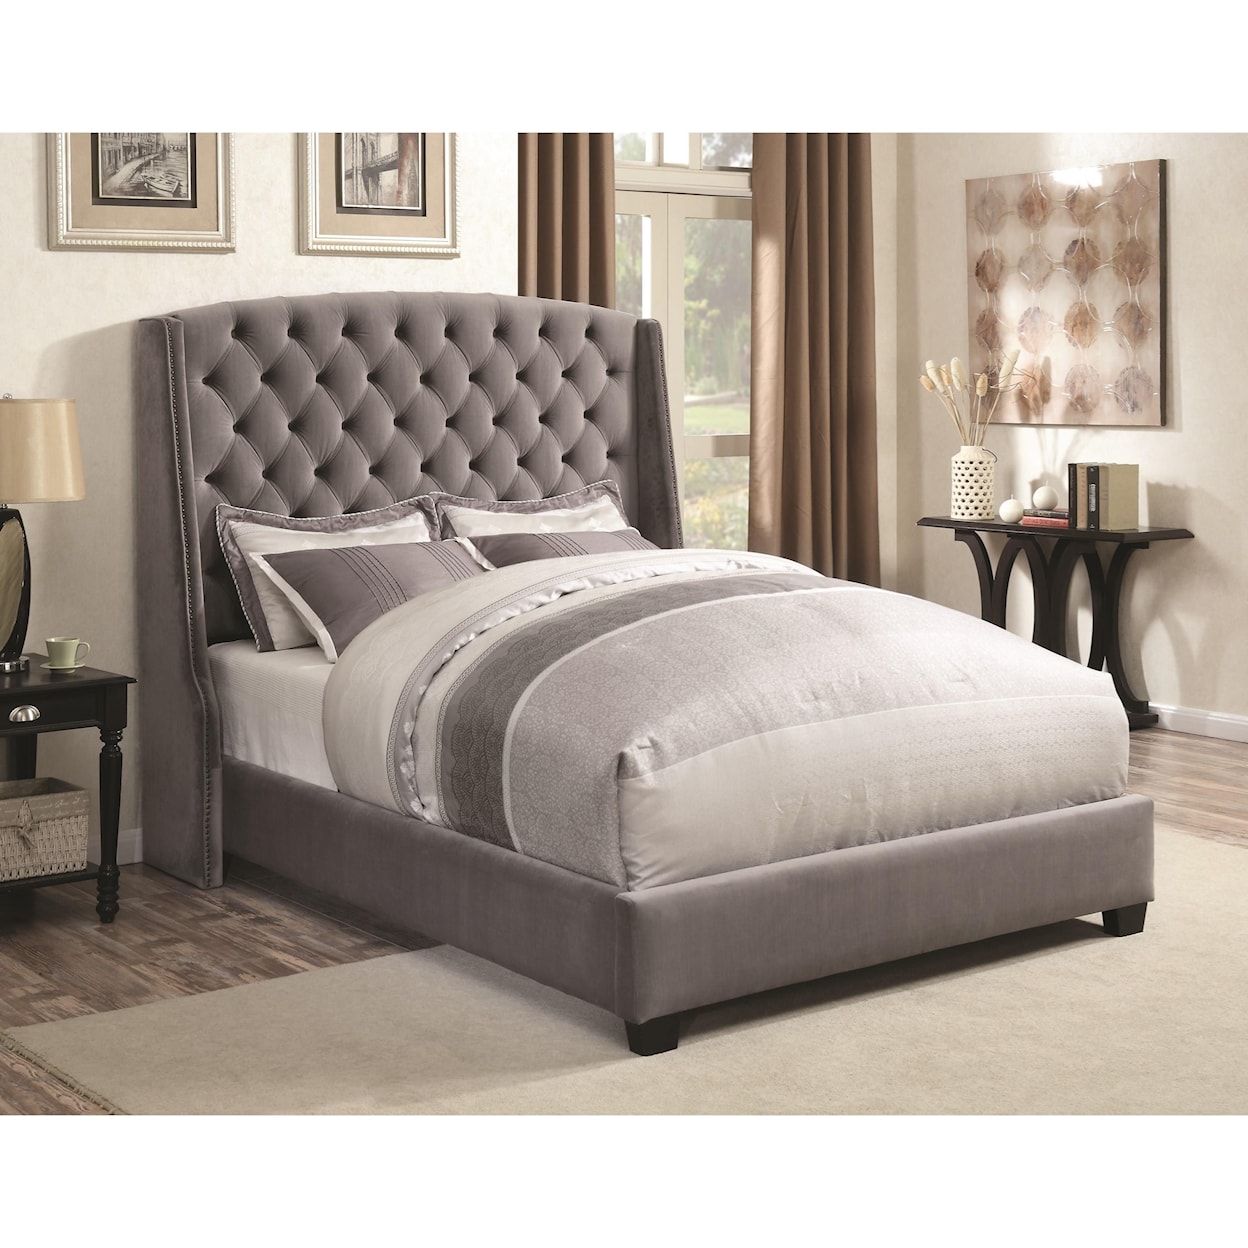 Coaster Upholstered Beds Pissarro King Bed